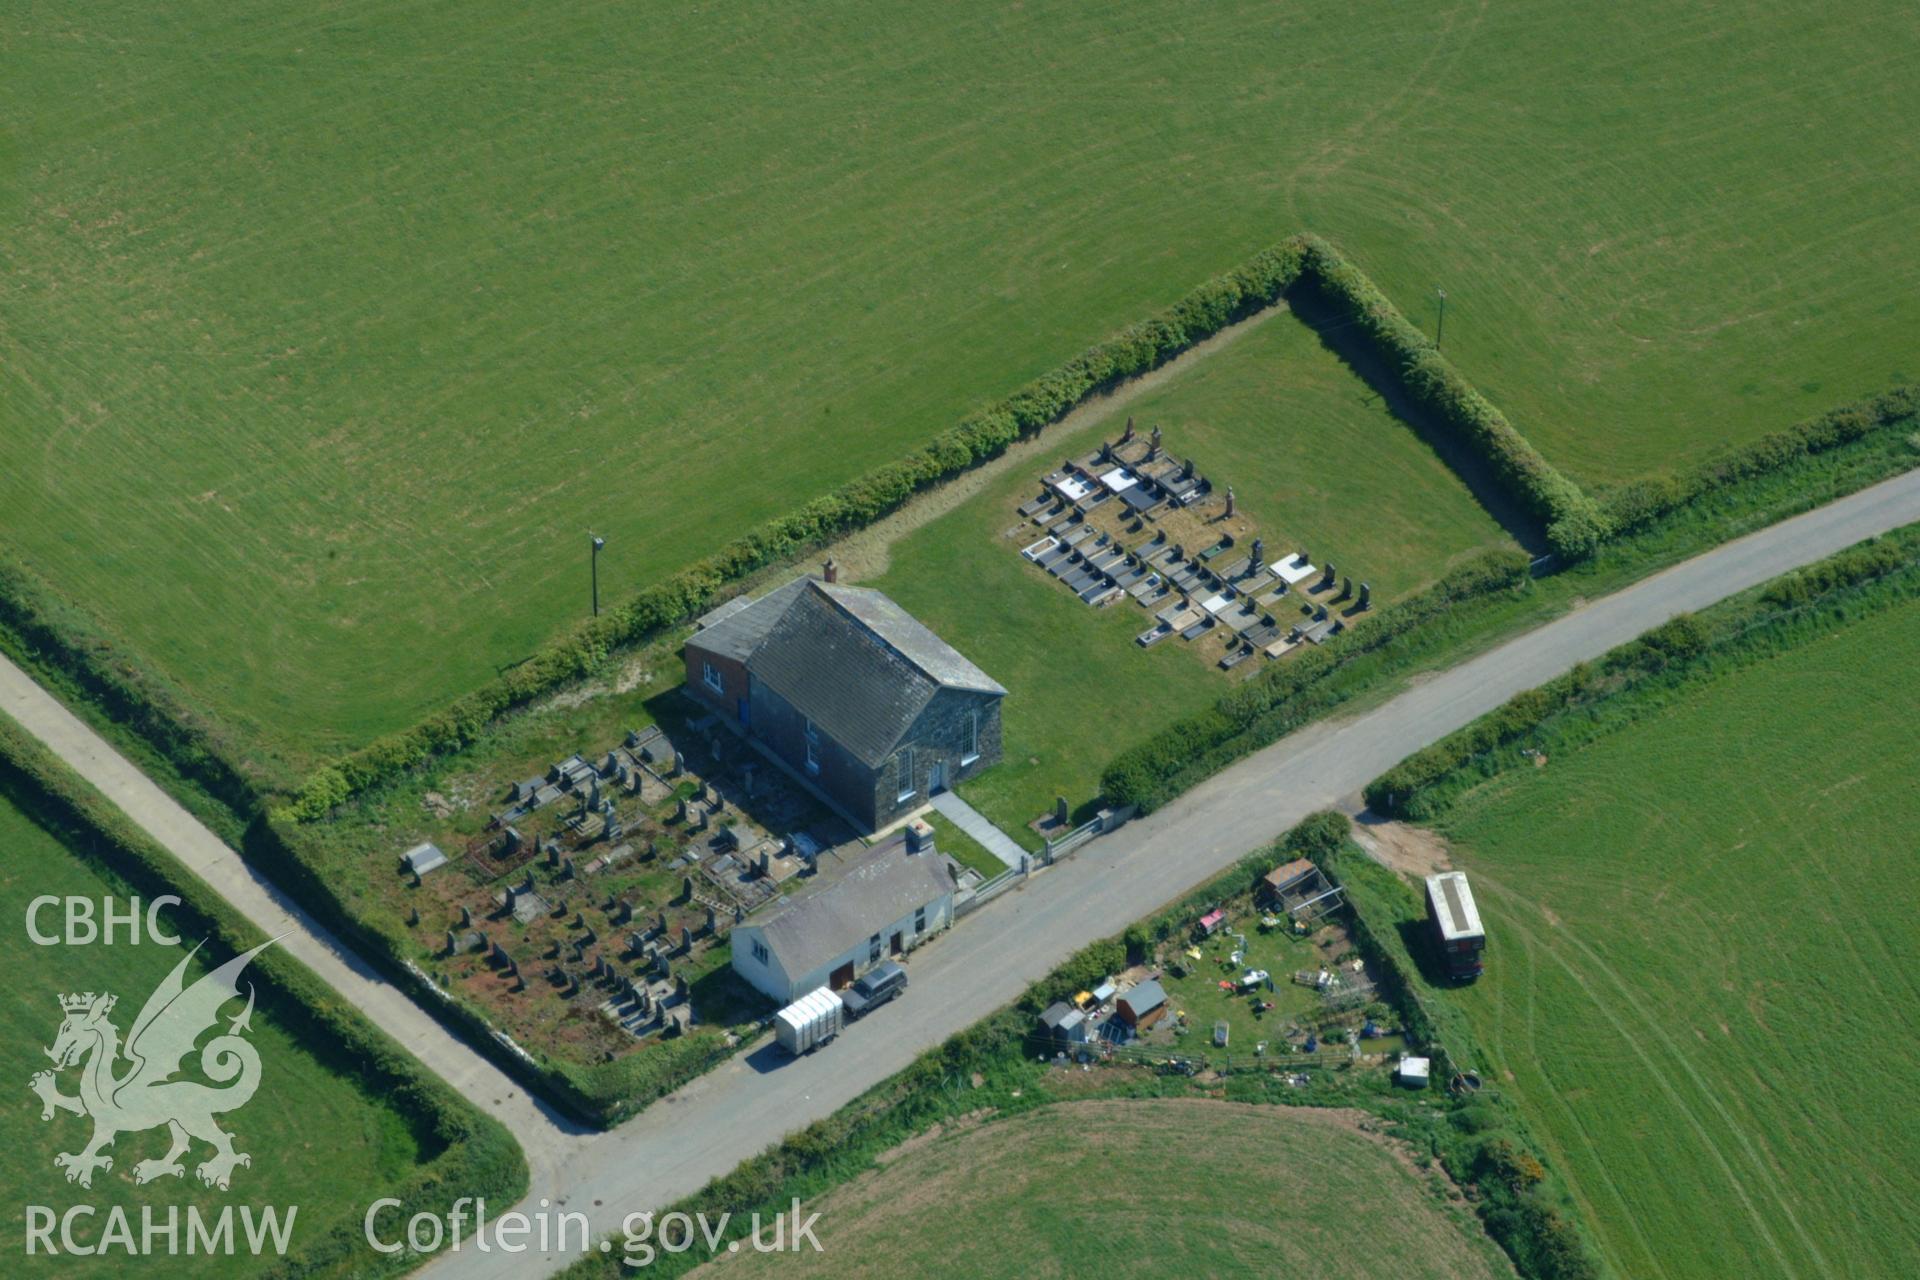 RCAHMW colour oblique aerial photograph of Penuel Welsh Baptist Church, Rhydymaen Cemaes taken on 24/05/2004 by Toby Driver